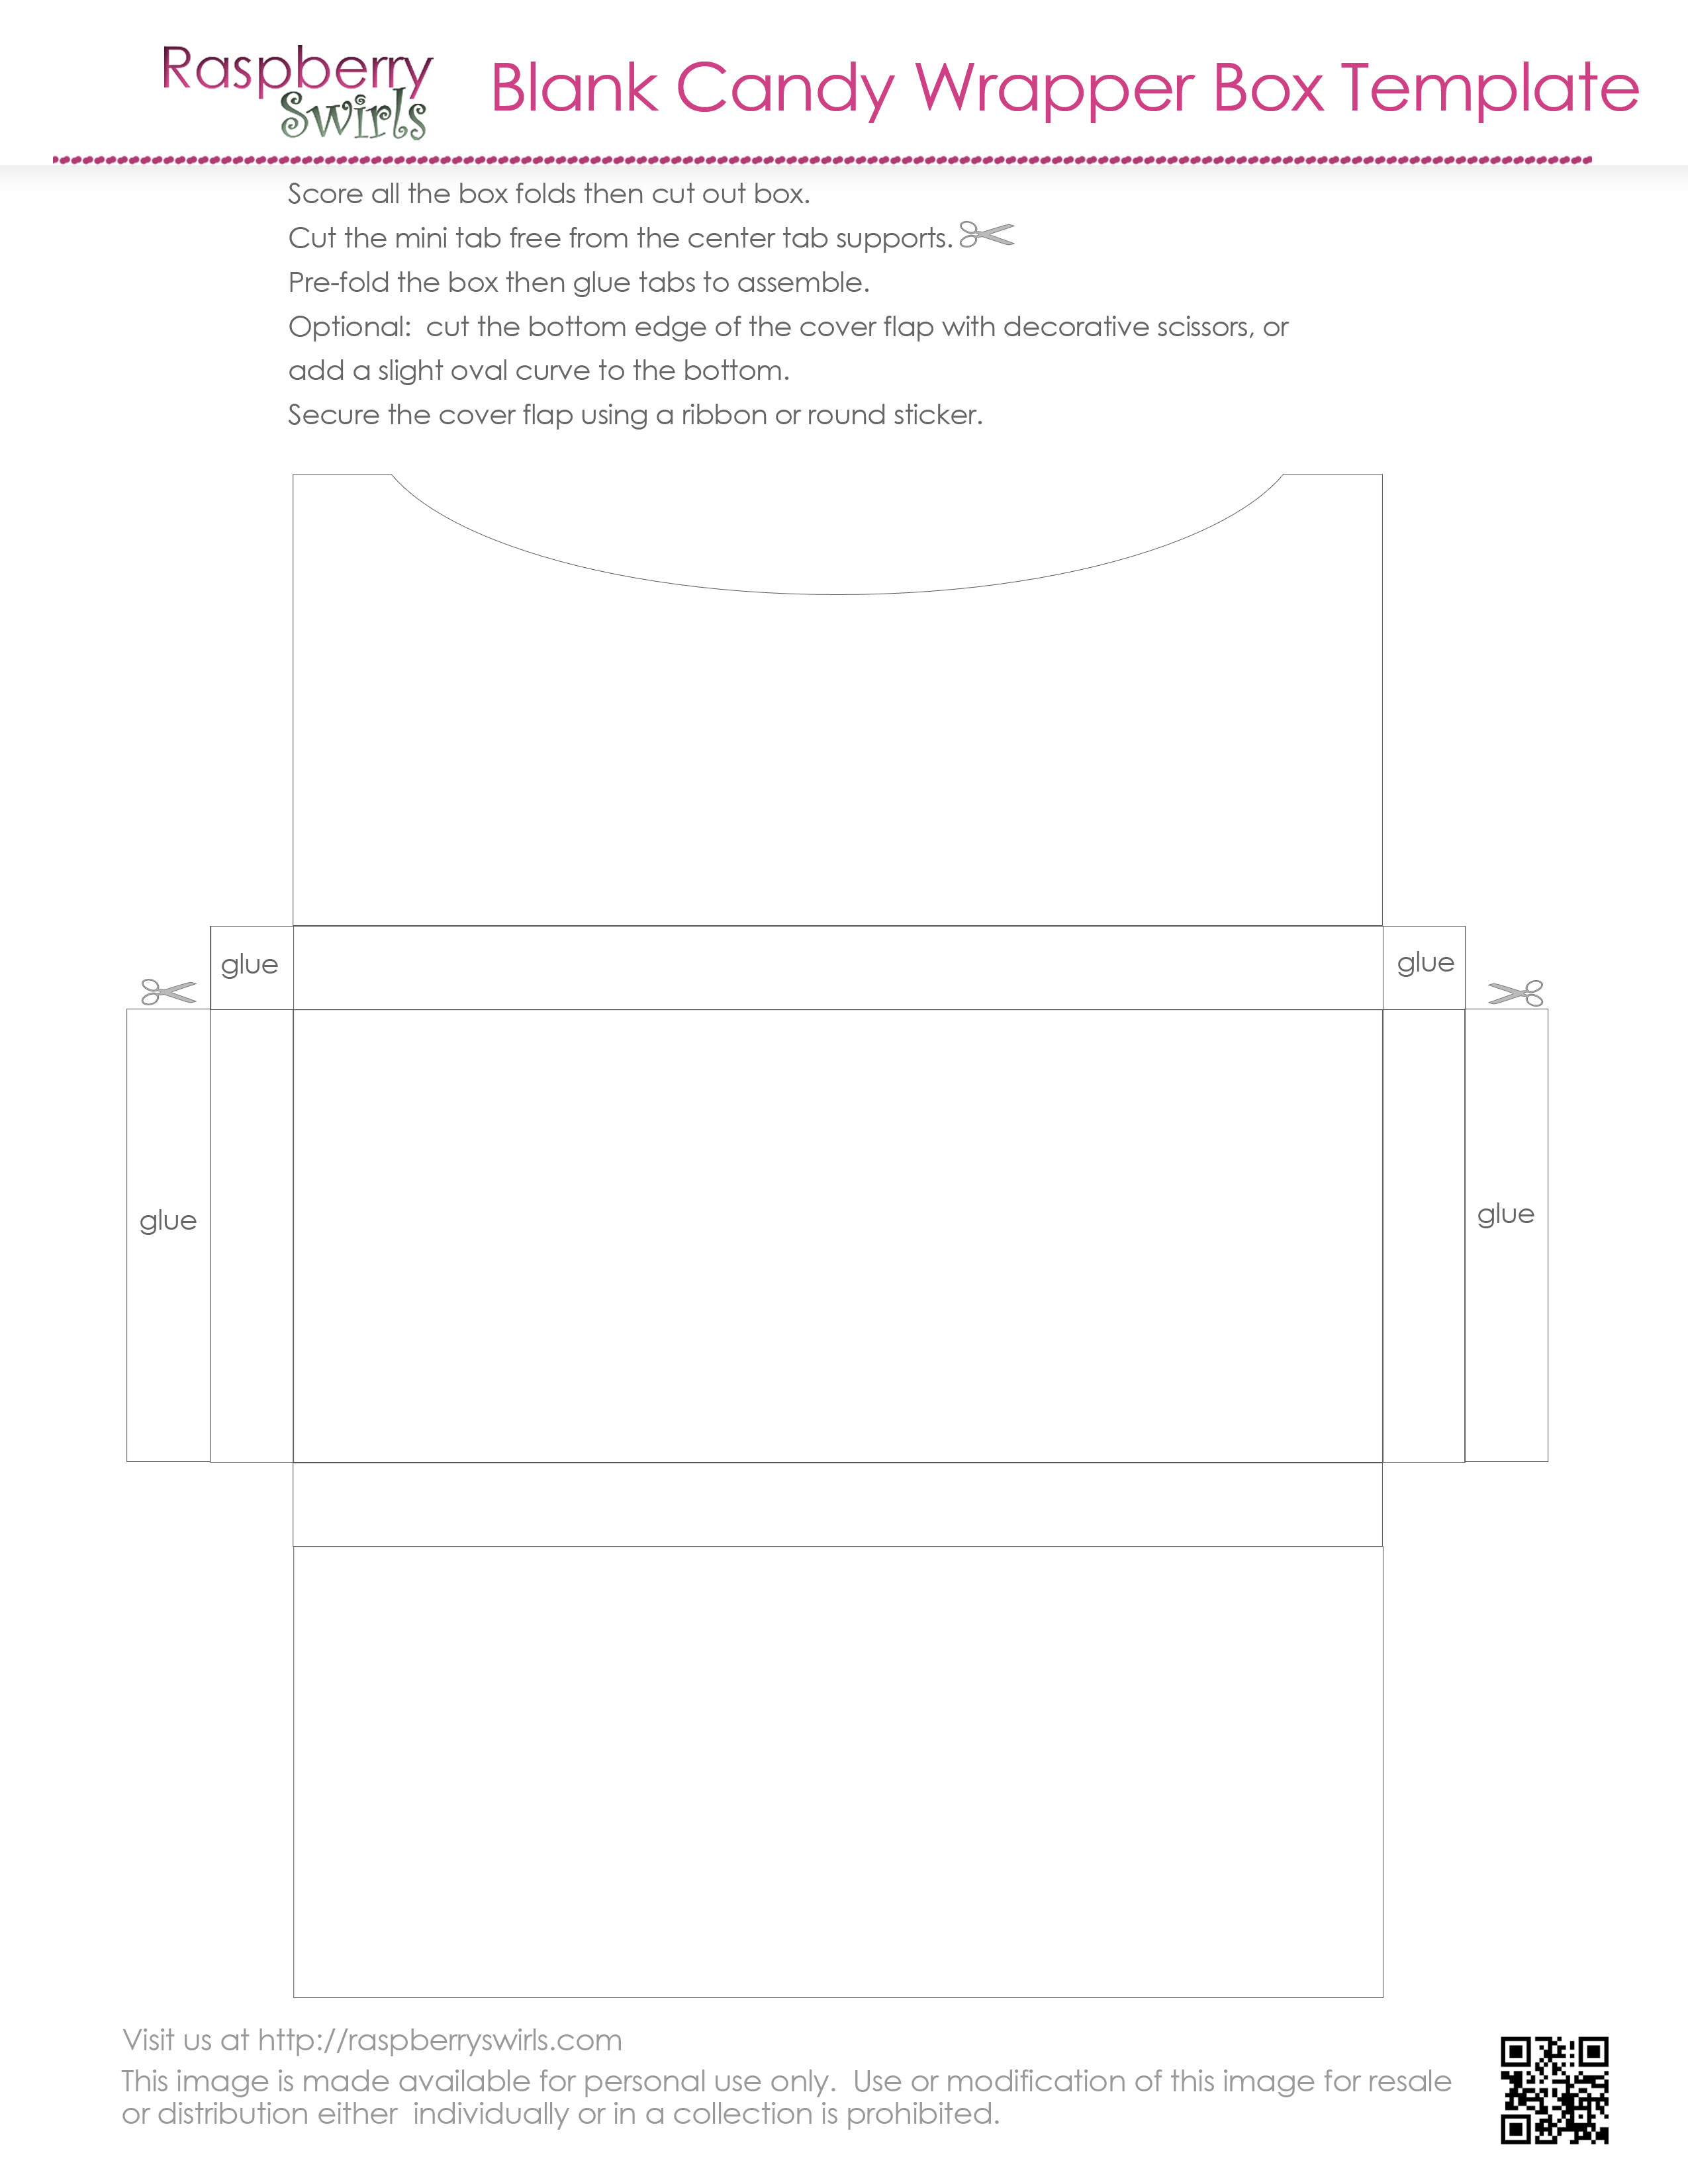 blank-candy-bar-wrapper-template-great-professional-template